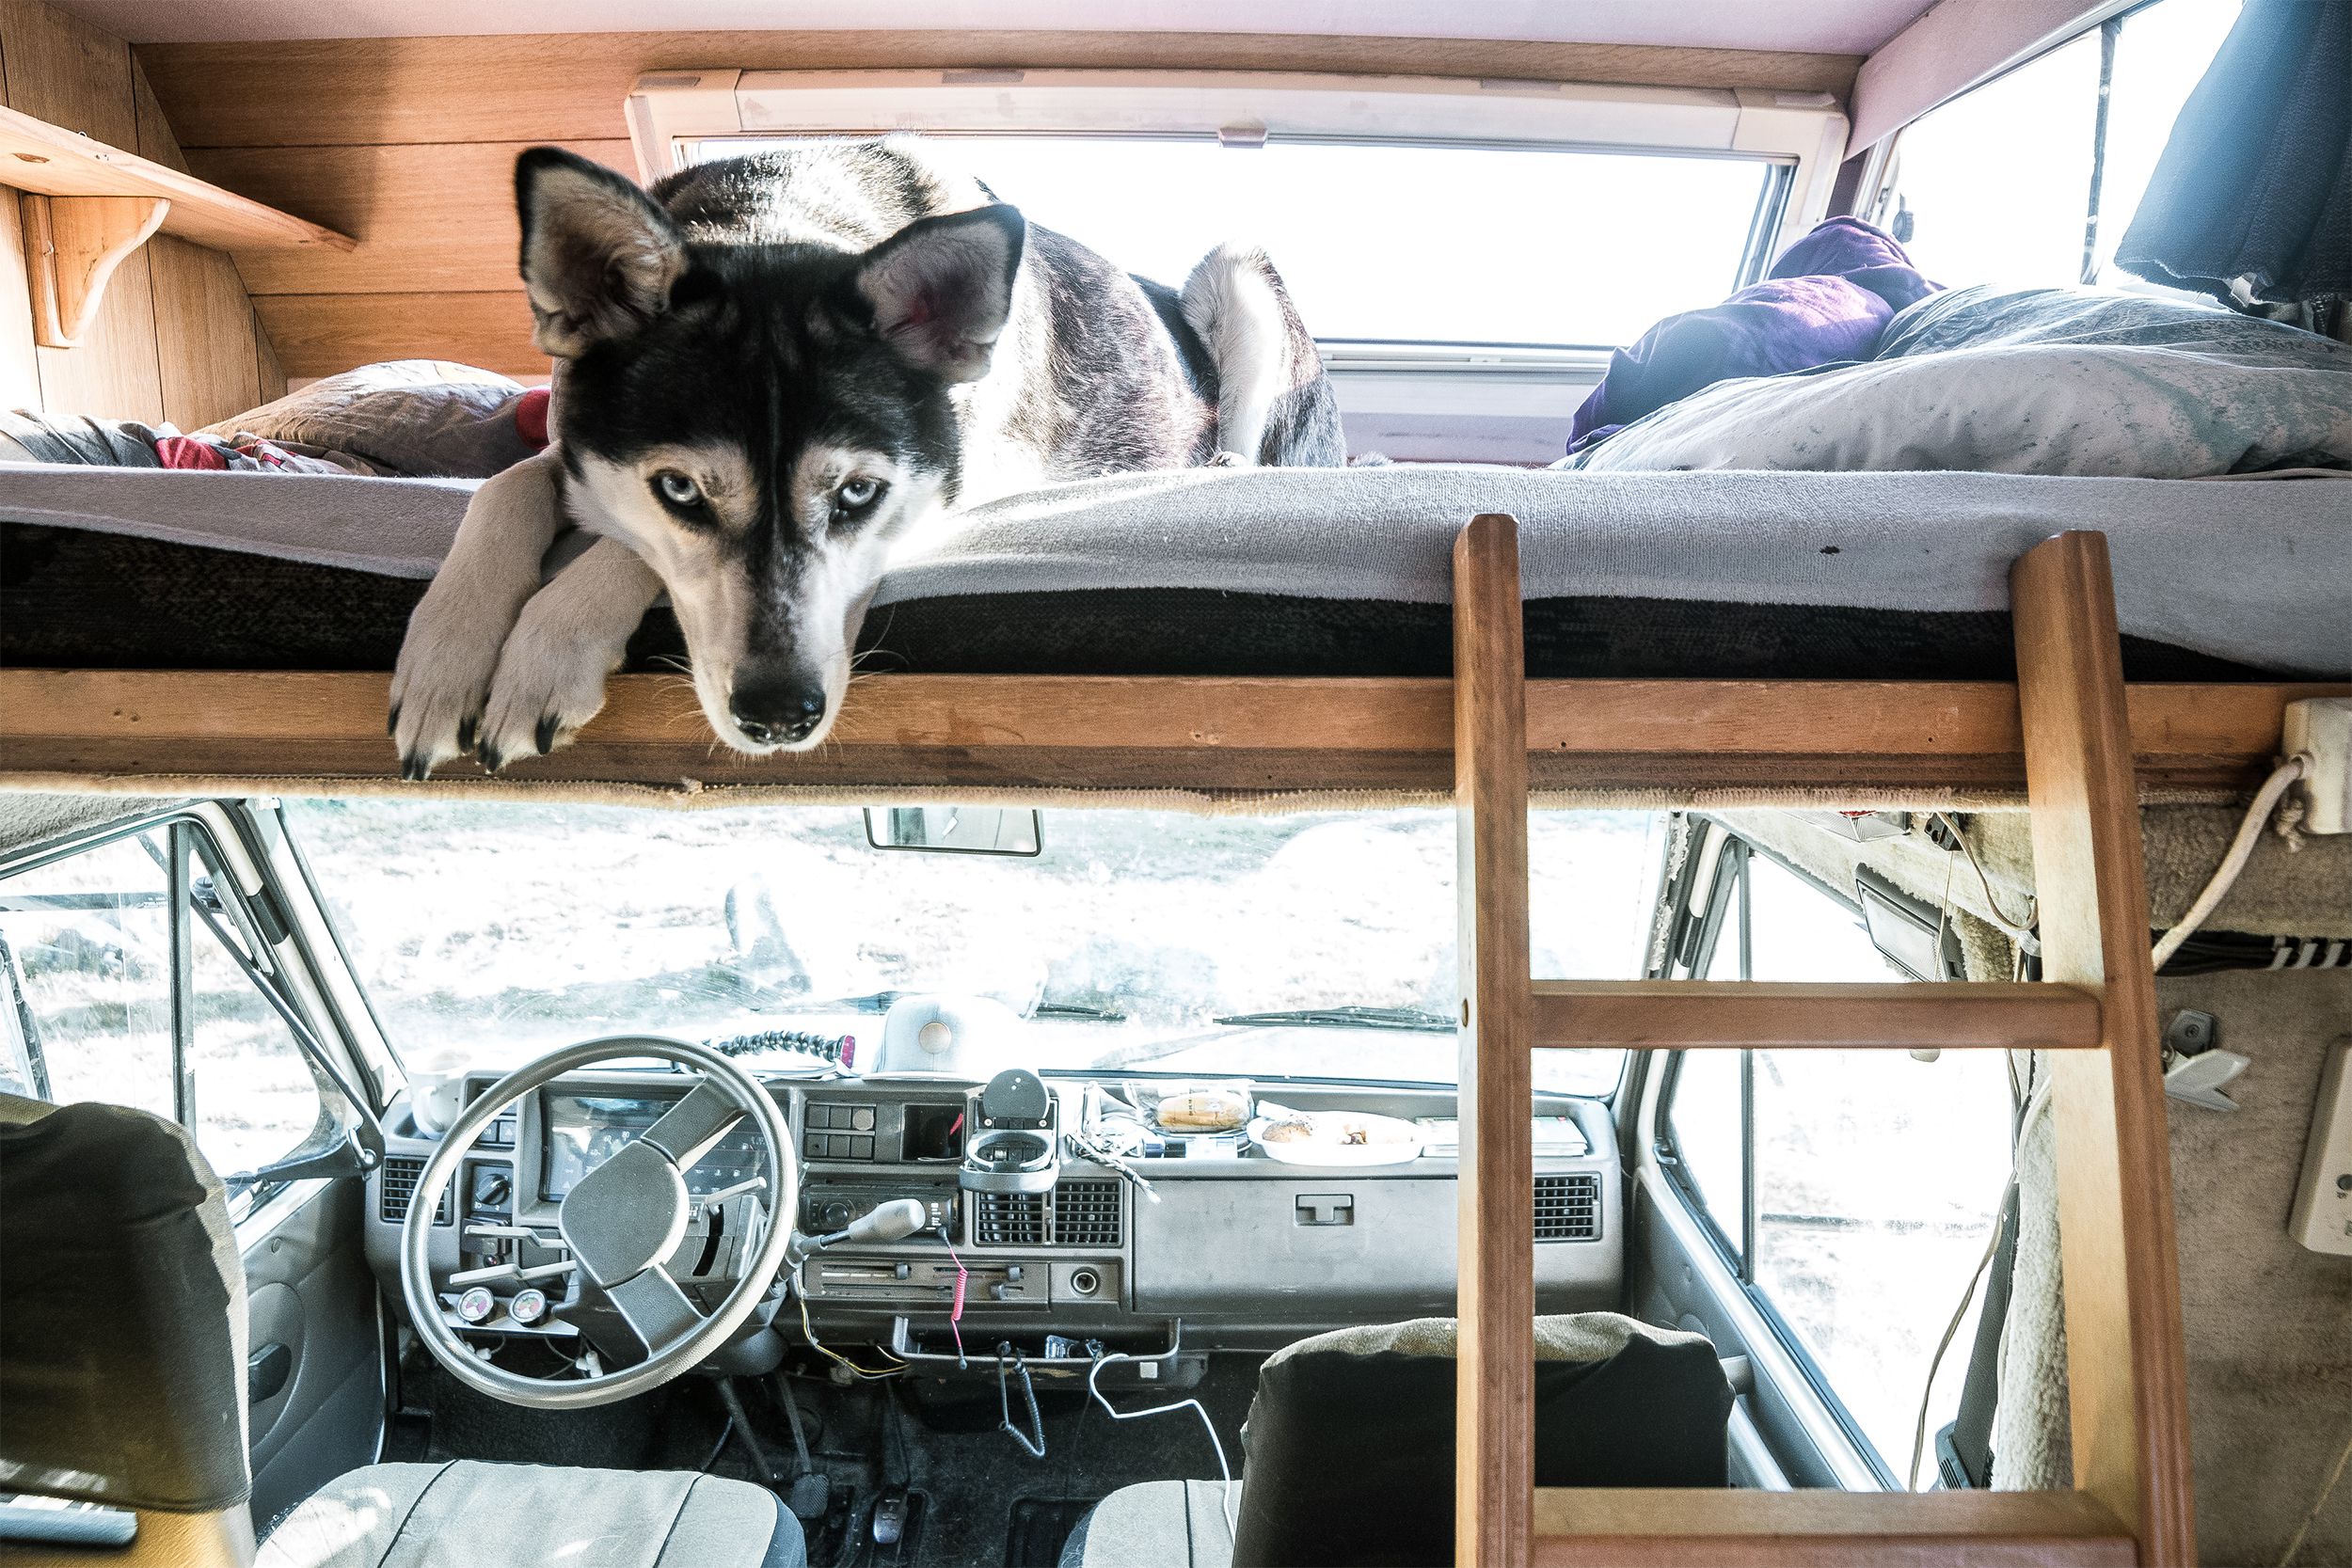 <p>RV camping is a family affair, and that includes the family pet. In addition to the 90% of owners who agree that RVs are the <a href="https://rvlife.com/modern-rvers/">best way to travel with kids</a>, more than half (54%) <a href="https://www.thewanderingrv.com/rv-industry-statistics-trends-facts/">bring their pets along</a> with them on RV vacations.  </p>